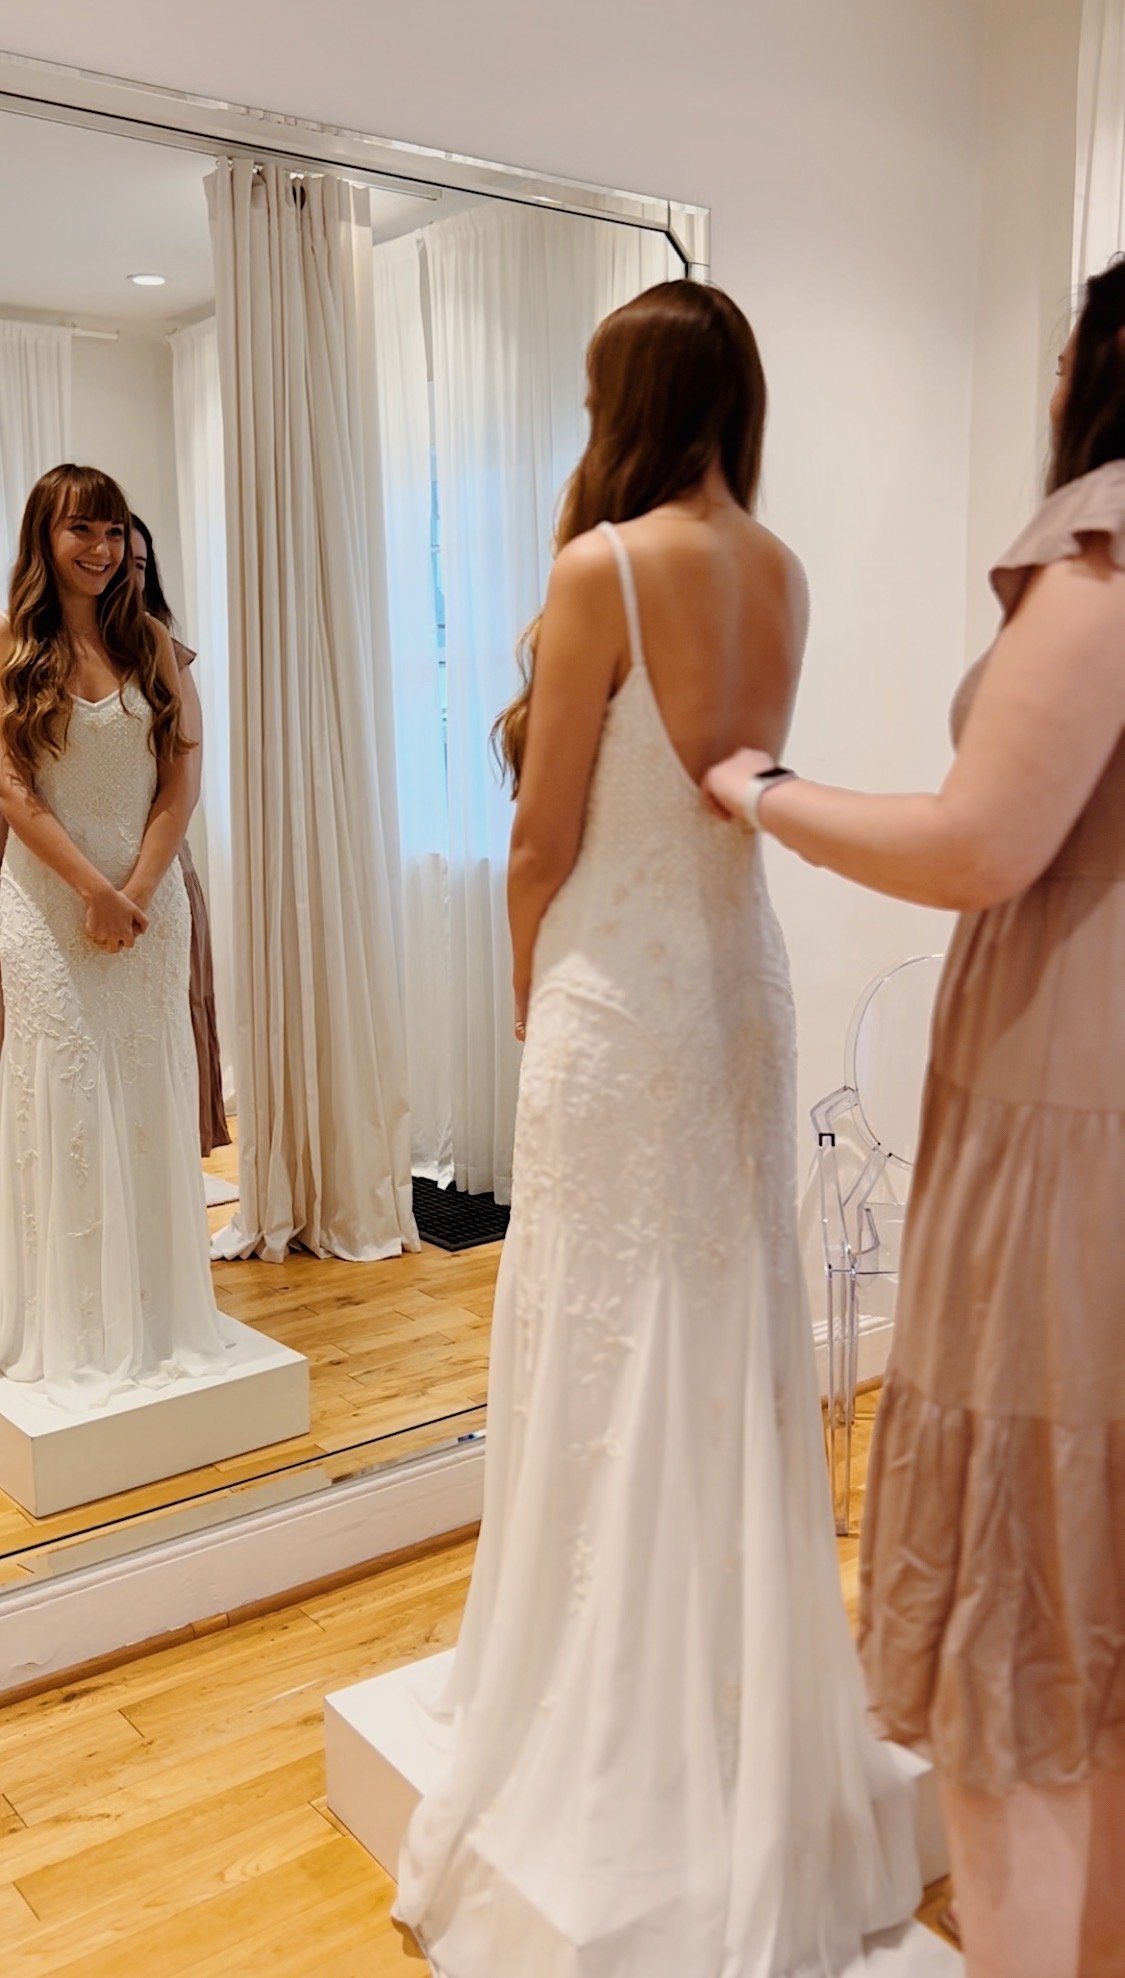  Join us for a bridal dress appointment at Bustle Gowns Birmingham. 